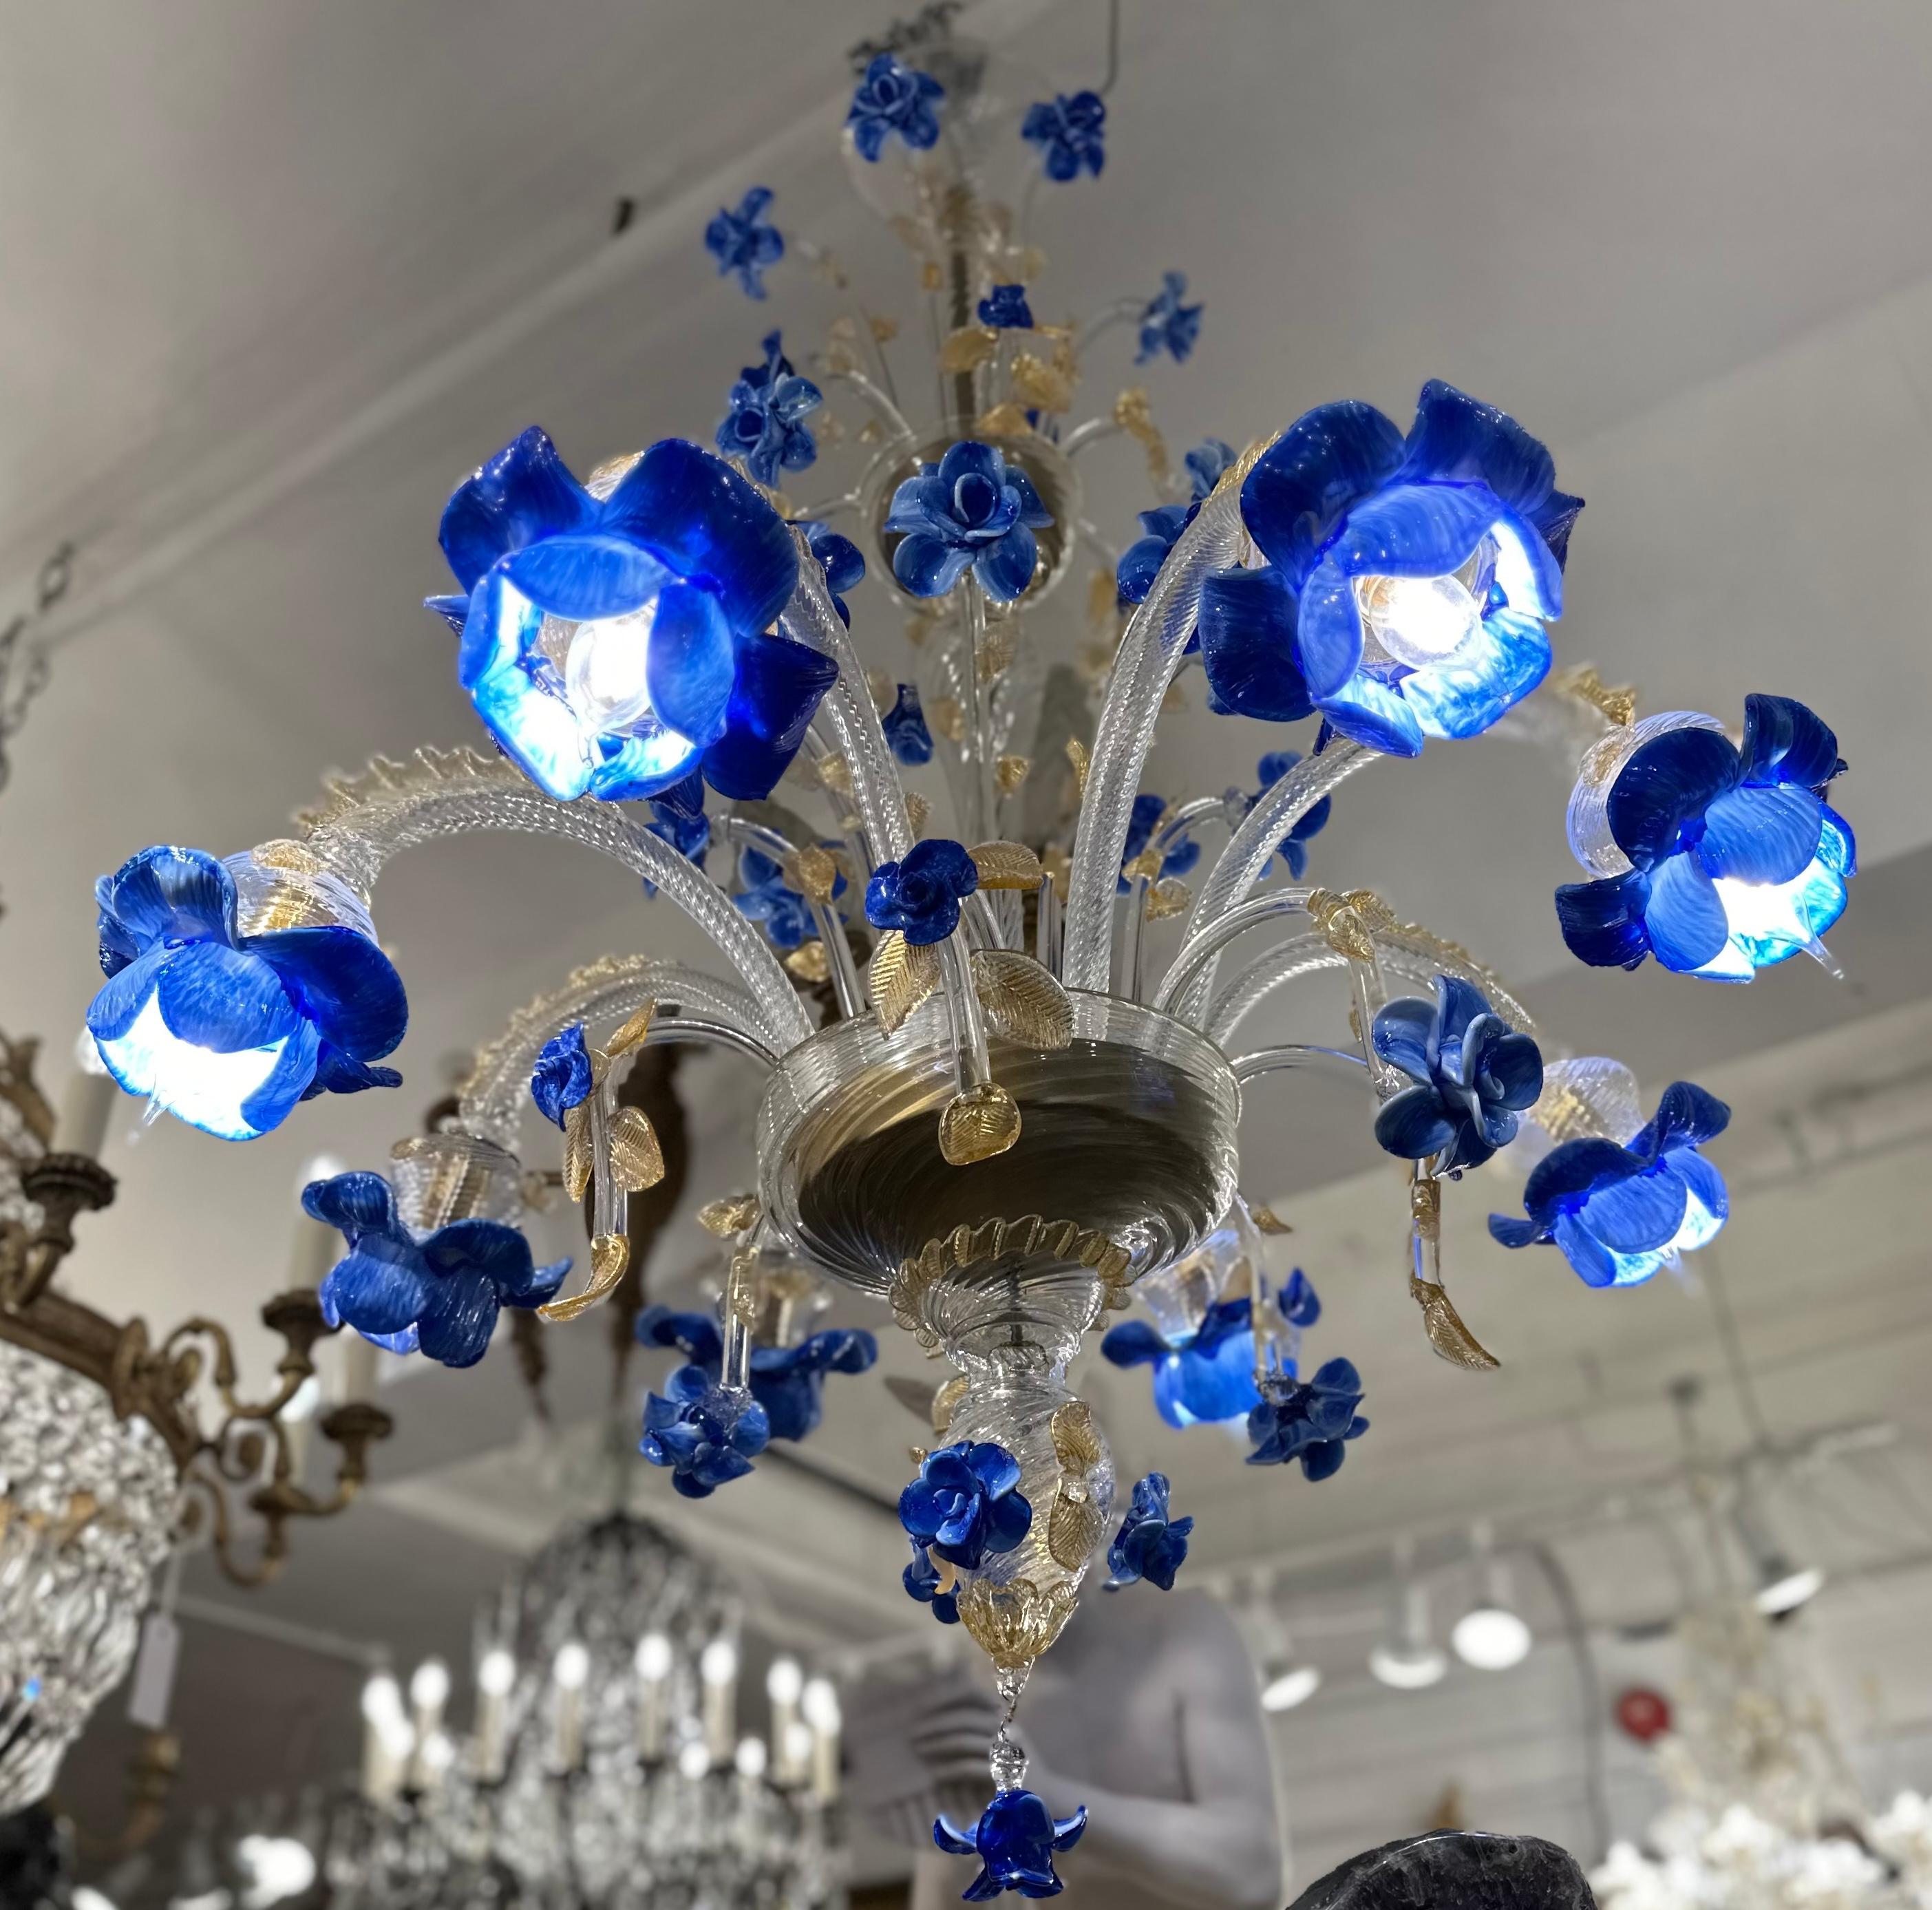 A dazzling blue, amber and gold murano glass chandelier, that is made with pure 24kt gold. Hand blown in Venice by skilled artisans this chandelier incorporates a delicate floral and foliage design. Murano glass is world renown, with a long history